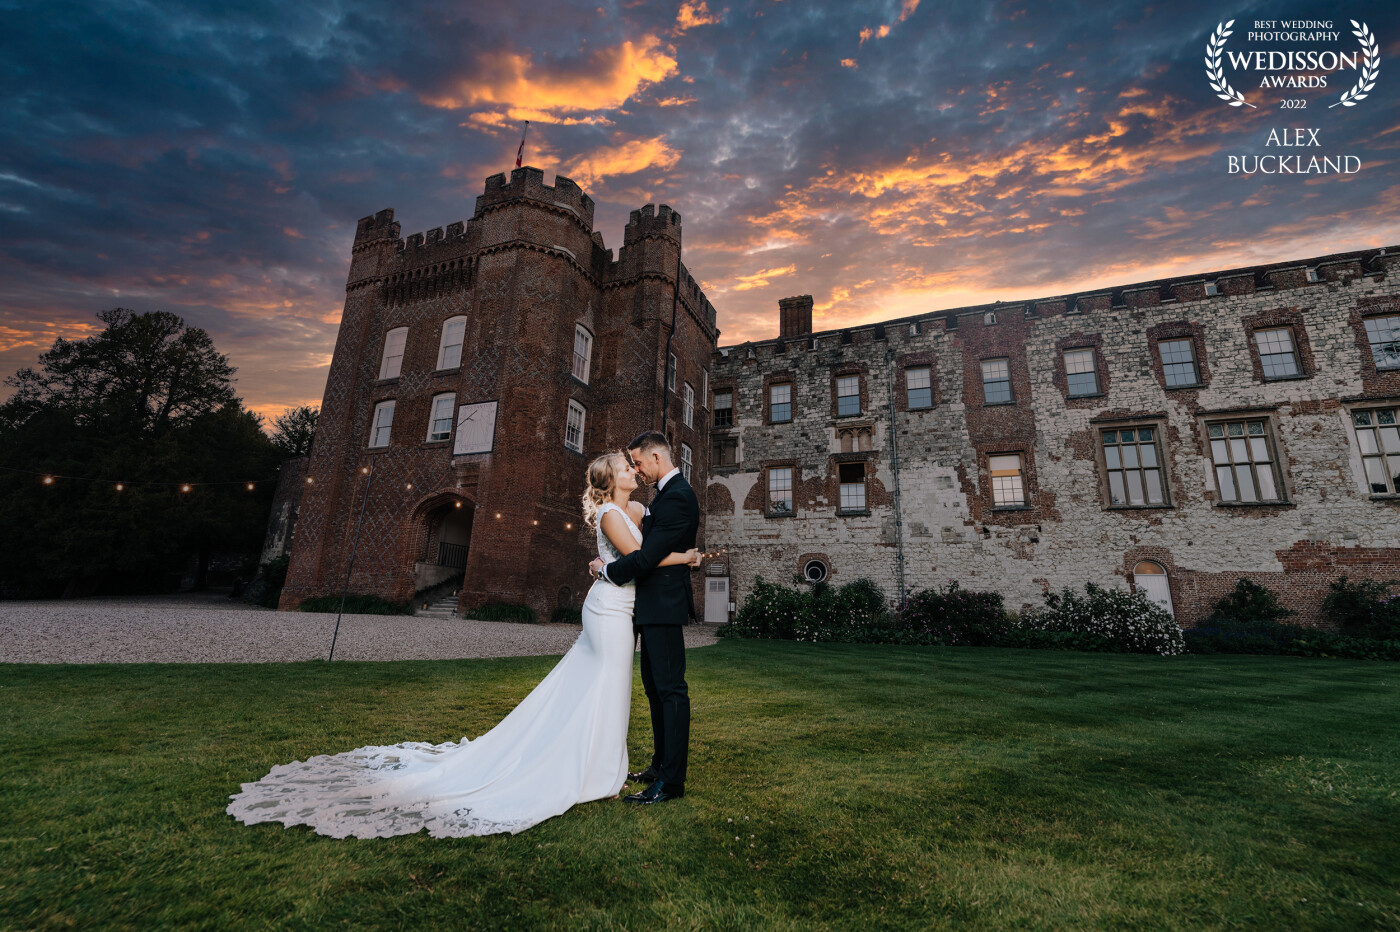 A fabulous couple and an amazing venue deserved a really creative photo! With beautiful skies as a background over this castle wedding, I lit the couple using a softbox camera right, along with one backlight to make the couple pop against the castle backdrop!